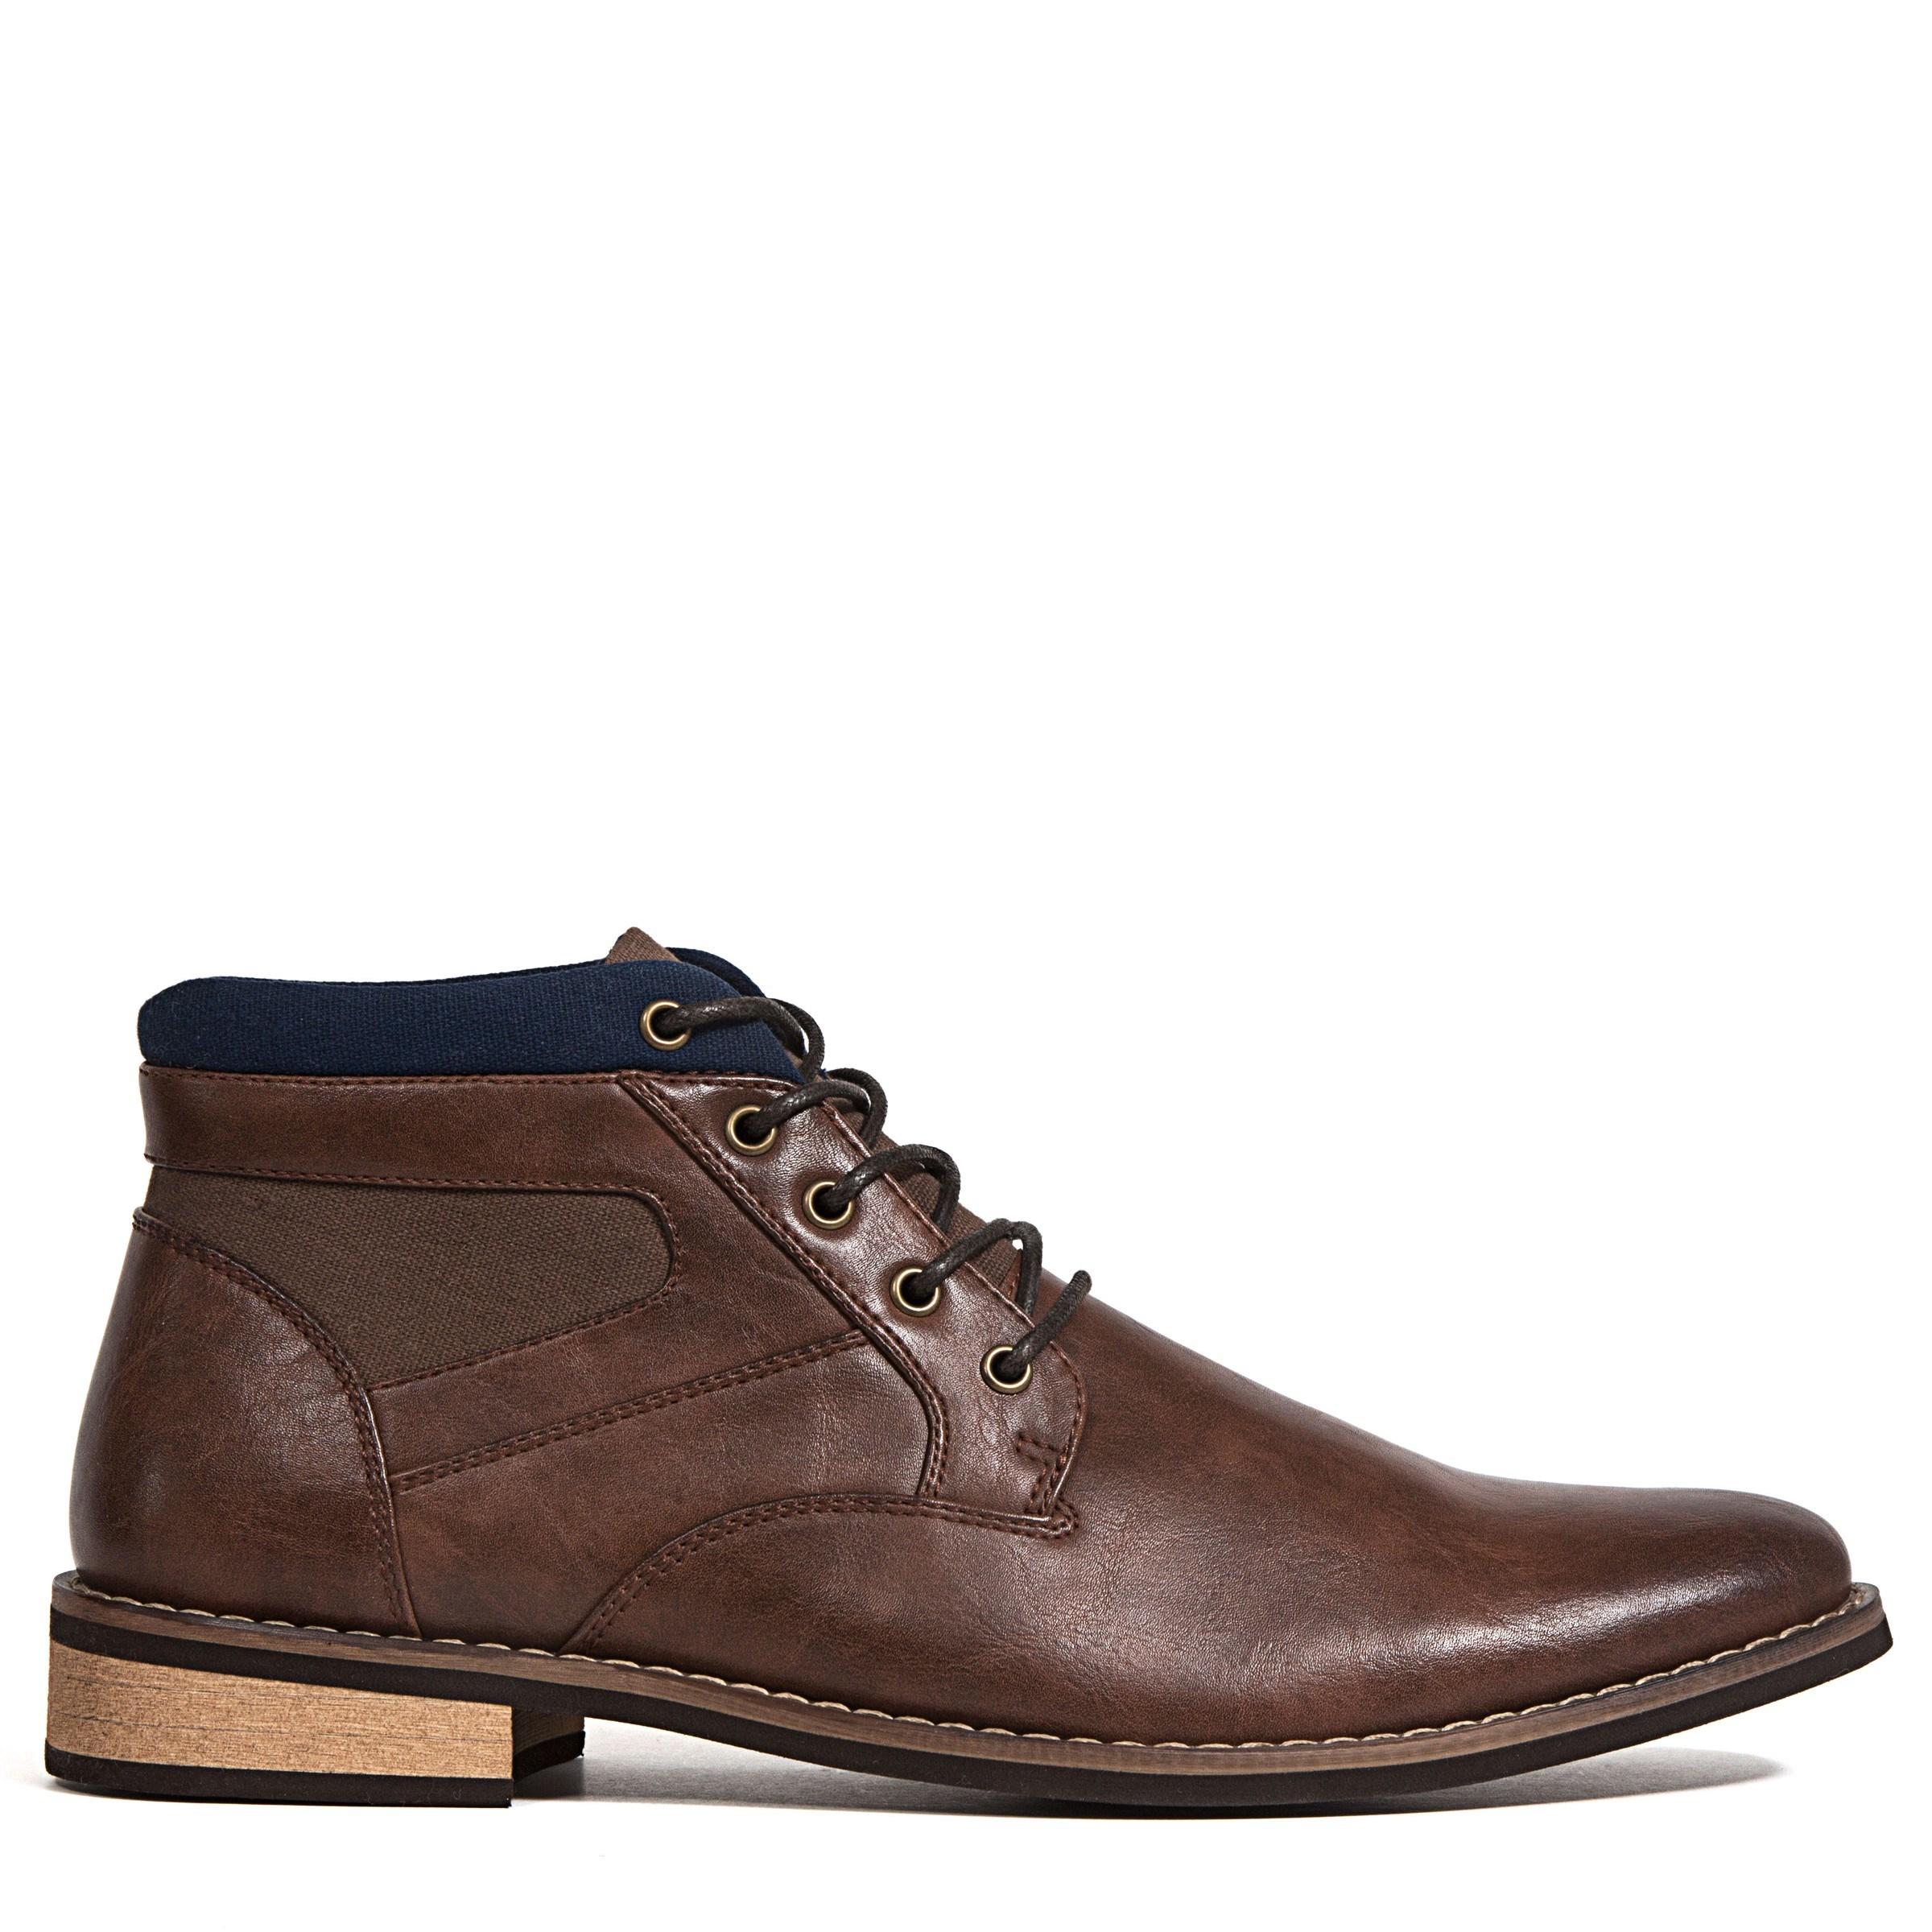 Deer Stags Irvine Chukka Boots in Brown/Navy (Brown) for Men - Lyst